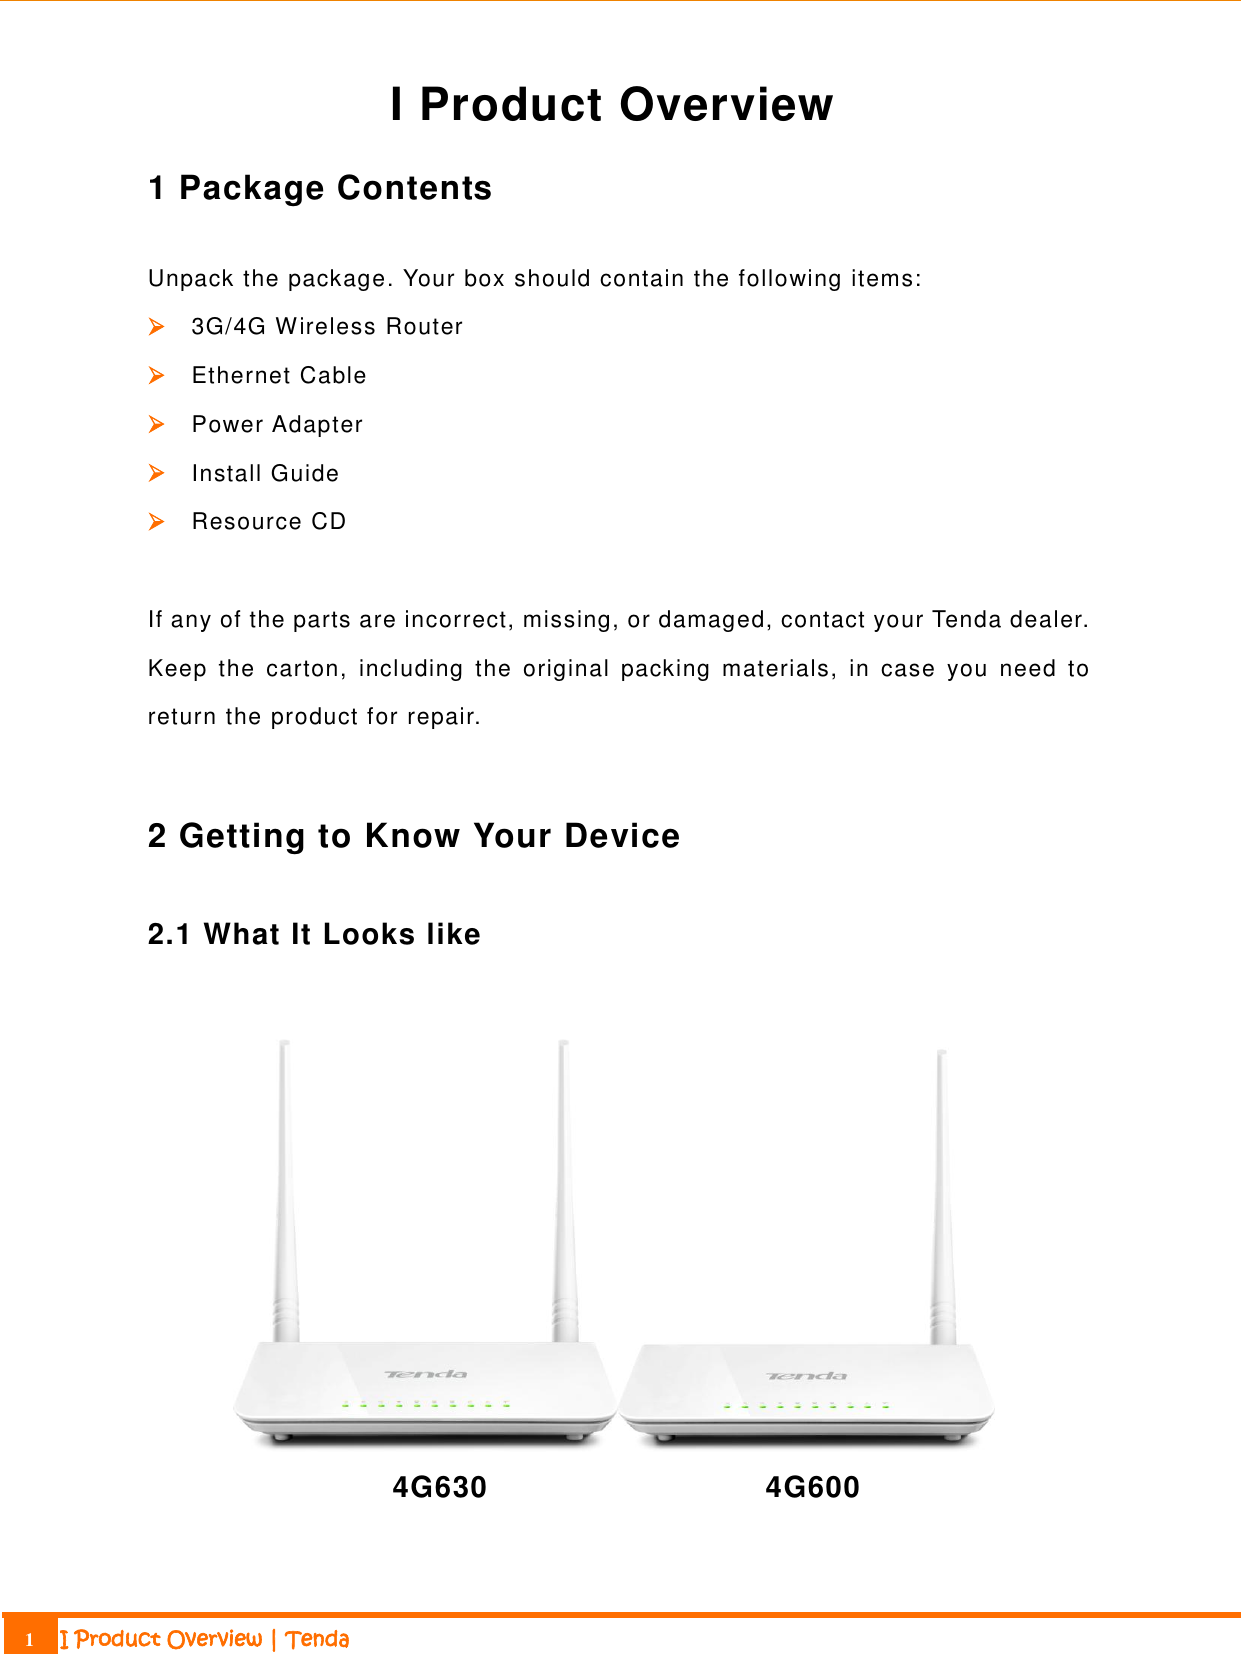                                                                             1 I Product Overview | Tenda  I Product Overview 1 Package Contents Unpack the package. Your box should contain the following items:  3G/4G Wireless Router  Ethernet Cable  Power Adapter  Install Guide  Resource CD  If any of the parts are incorrect, missing, or damaged, contact your Tenda dealer. Keep  the  carton,  including  the  original  packing  materials,  in  case  you  need  to return the product for repair.  2 Getting to Know Your Device 2.1 What It Looks like   4G630                                  4G600 